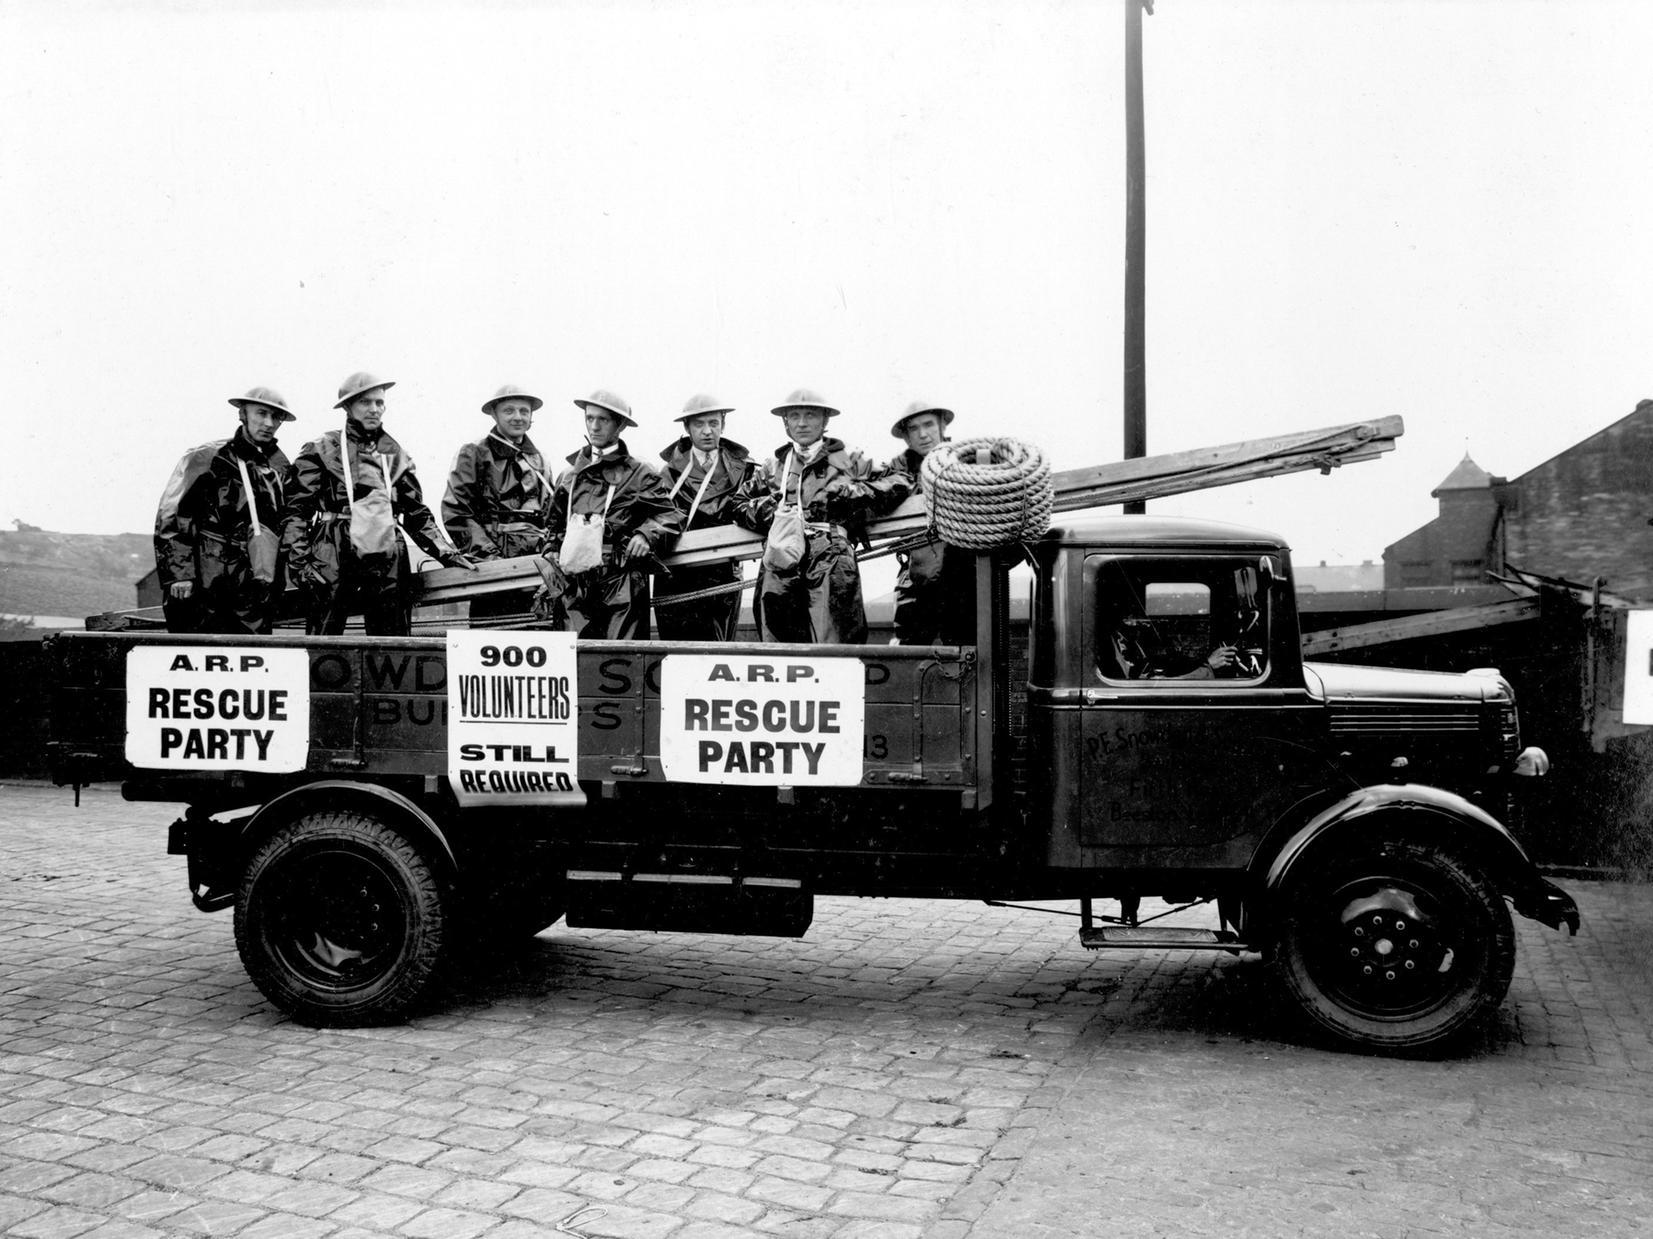 A.R.P. (Air Raid Precaution) rescue party stand on the back of a Bedford truck, equipped with ladders, rope and other rescue equipment. The men are dressed in protective clothing with tin hats and gas mask bags.